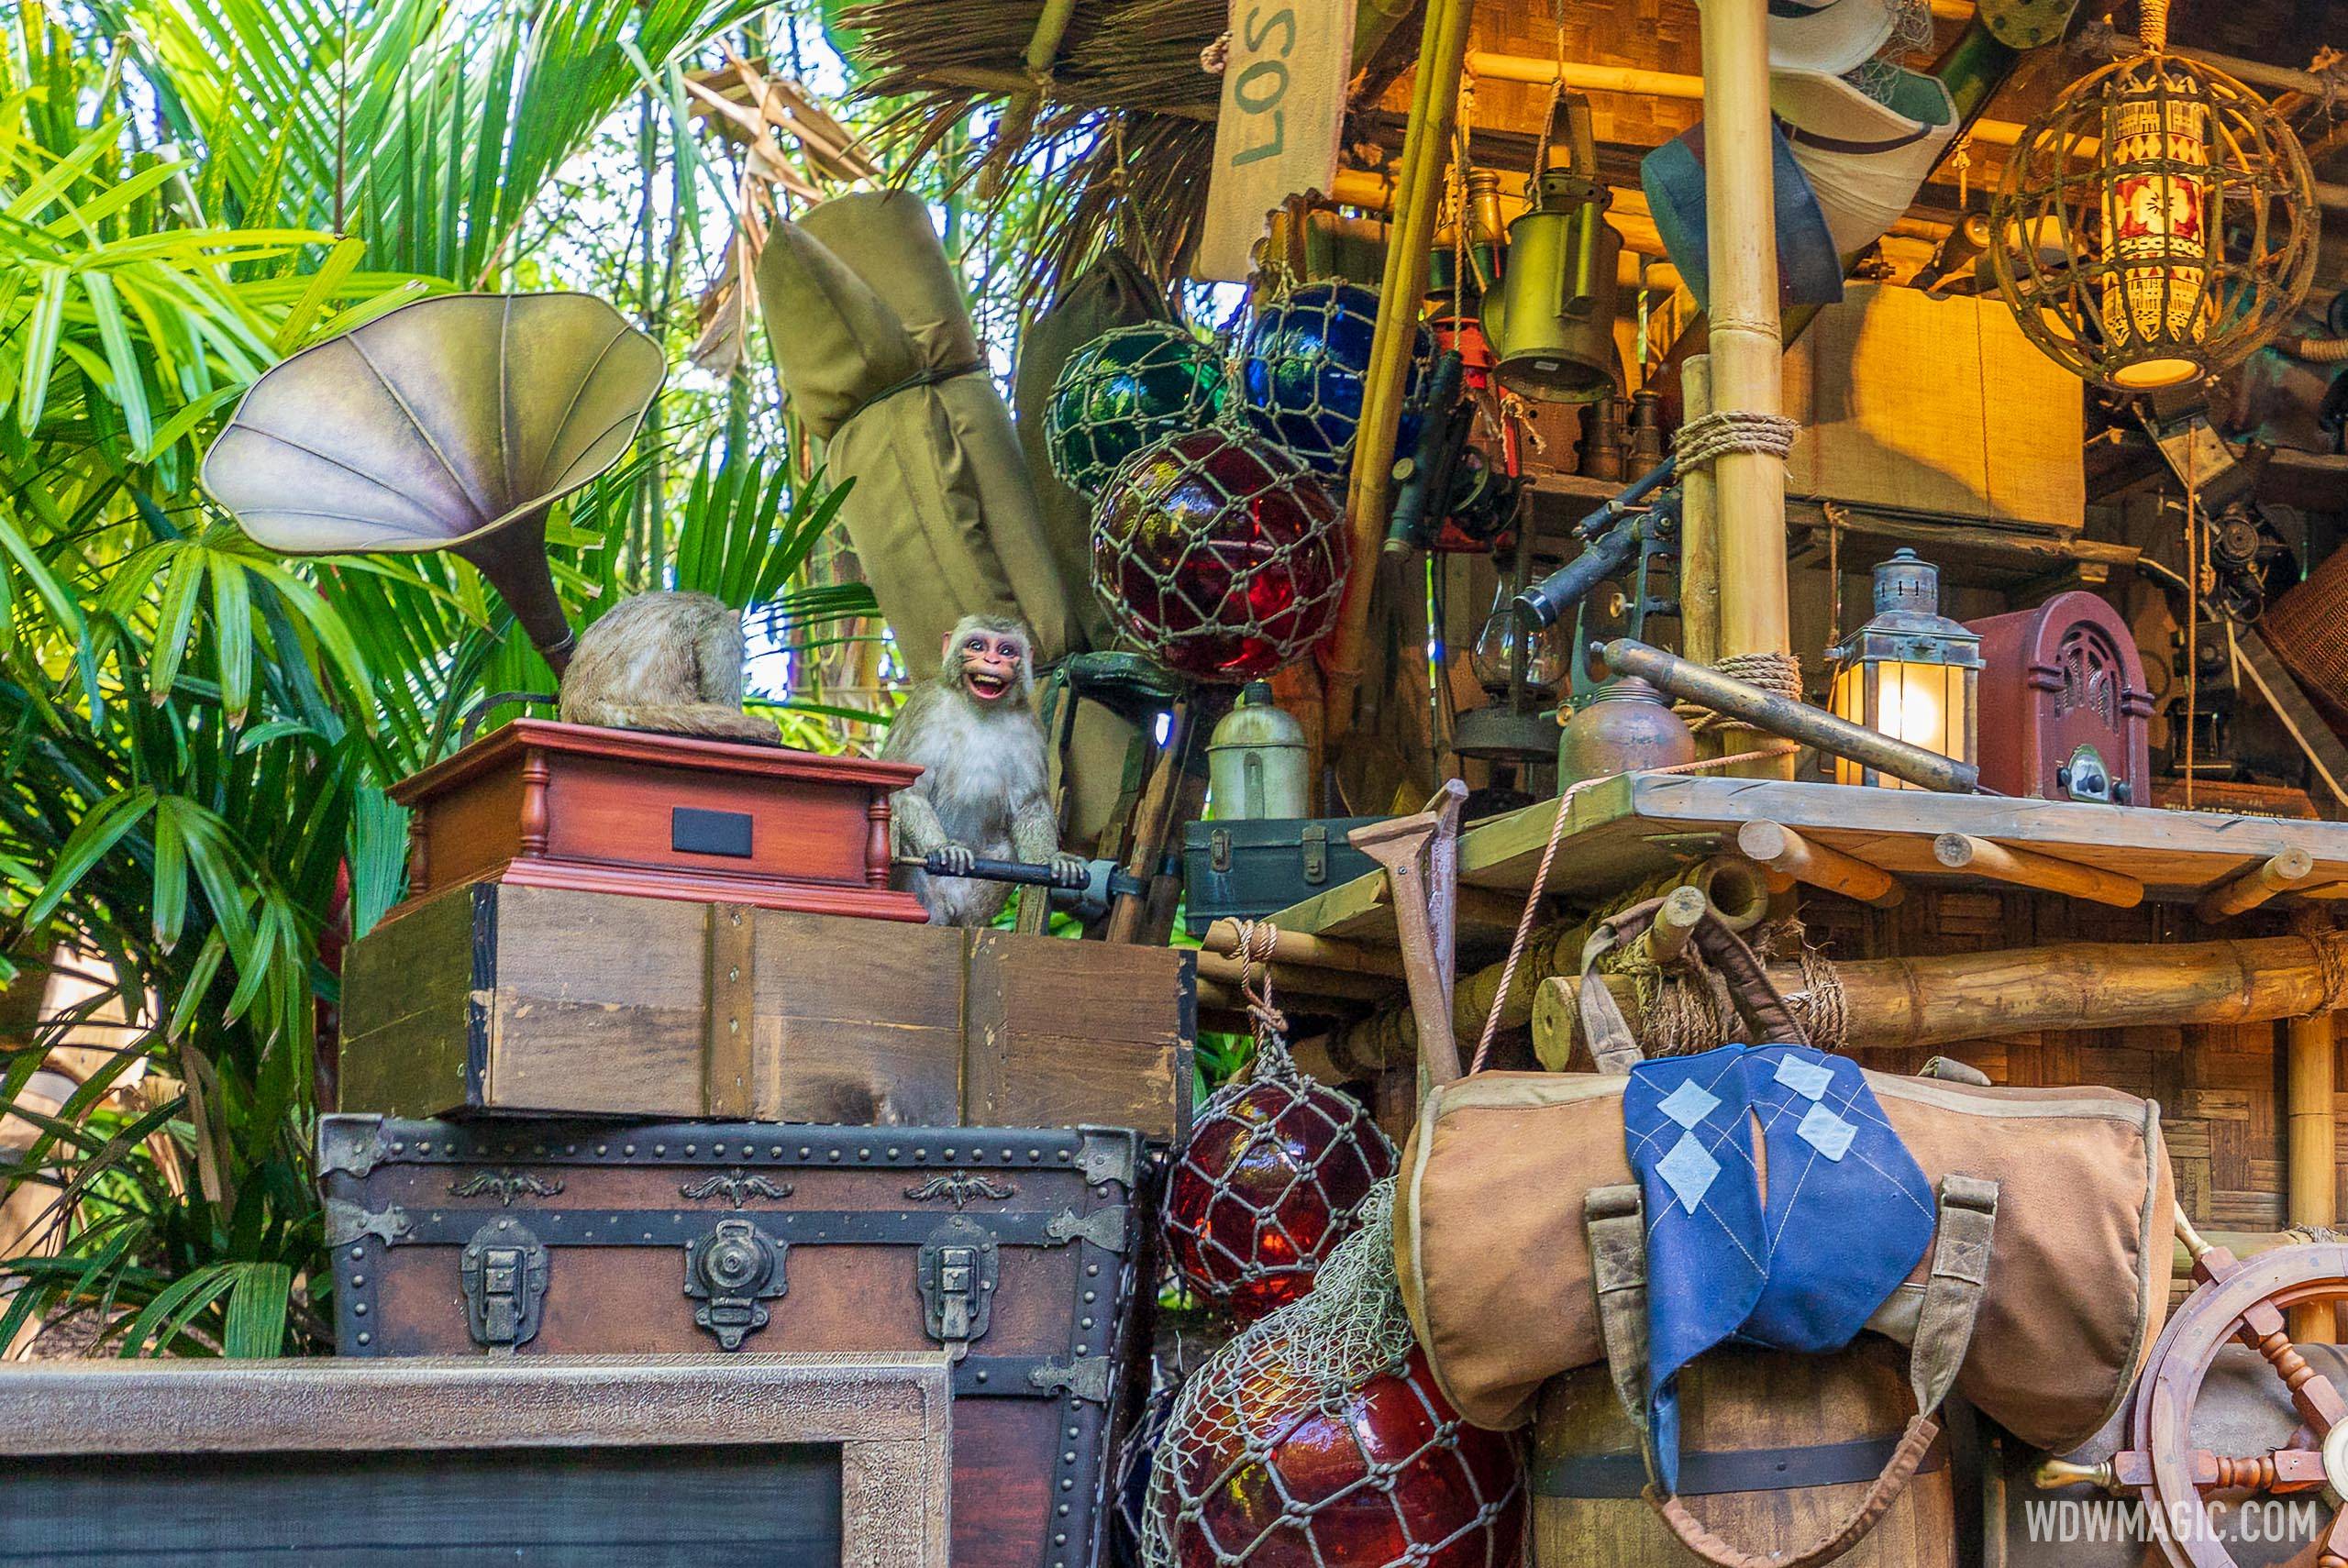 Animated figures added to Trader Sam's Gift Shop scene